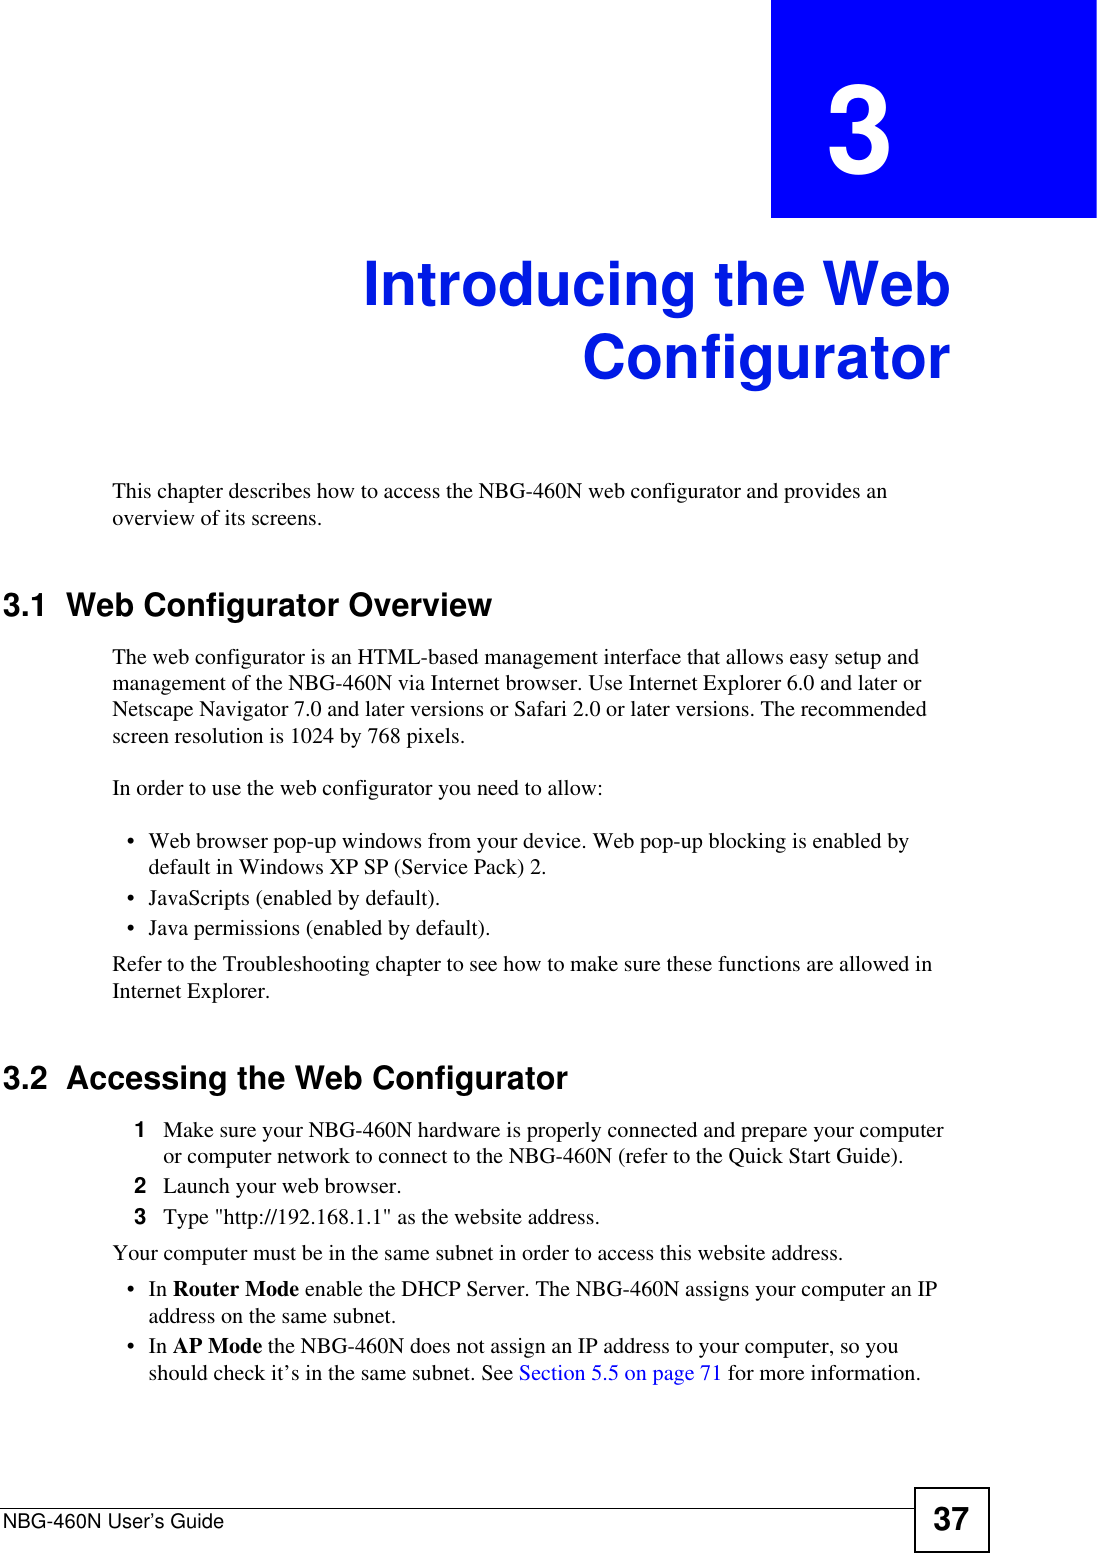 NBG-460N User’s Guide 37CHAPTER  3 Introducing the WebConfiguratorThis chapter describes how to access the NBG-460N web configurator and provides an overview of its screens.3.1  Web Configurator OverviewThe web configurator is an HTML-based management interface that allows easy setup and management of the NBG-460N via Internet browser. Use Internet Explorer 6.0 and later or Netscape Navigator 7.0 and later versions or Safari 2.0 or later versions. The recommended screen resolution is 1024 by 768 pixels.In order to use the web configurator you need to allow:• Web browser pop-up windows from your device. Web pop-up blocking is enabled by default in Windows XP SP (Service Pack) 2.• JavaScripts (enabled by default).• Java permissions (enabled by default).Refer to the Troubleshooting chapter to see how to make sure these functions are allowed in Internet Explorer.3.2  Accessing the Web Configurator1Make sure your NBG-460N hardware is properly connected and prepare your computer or computer network to connect to the NBG-460N (refer to the Quick Start Guide).2Launch your web browser.3Type &quot;http://192.168.1.1&quot; as the website address. Your computer must be in the same subnet in order to access this website address.•In Router Mode enable the DHCP Server. The NBG-460N assigns your computer an IP address on the same subnet. •In AP Mode the NBG-460N does not assign an IP address to your computer, so you should check it’s in the same subnet. See Section 5.5 on page 71 for more information.